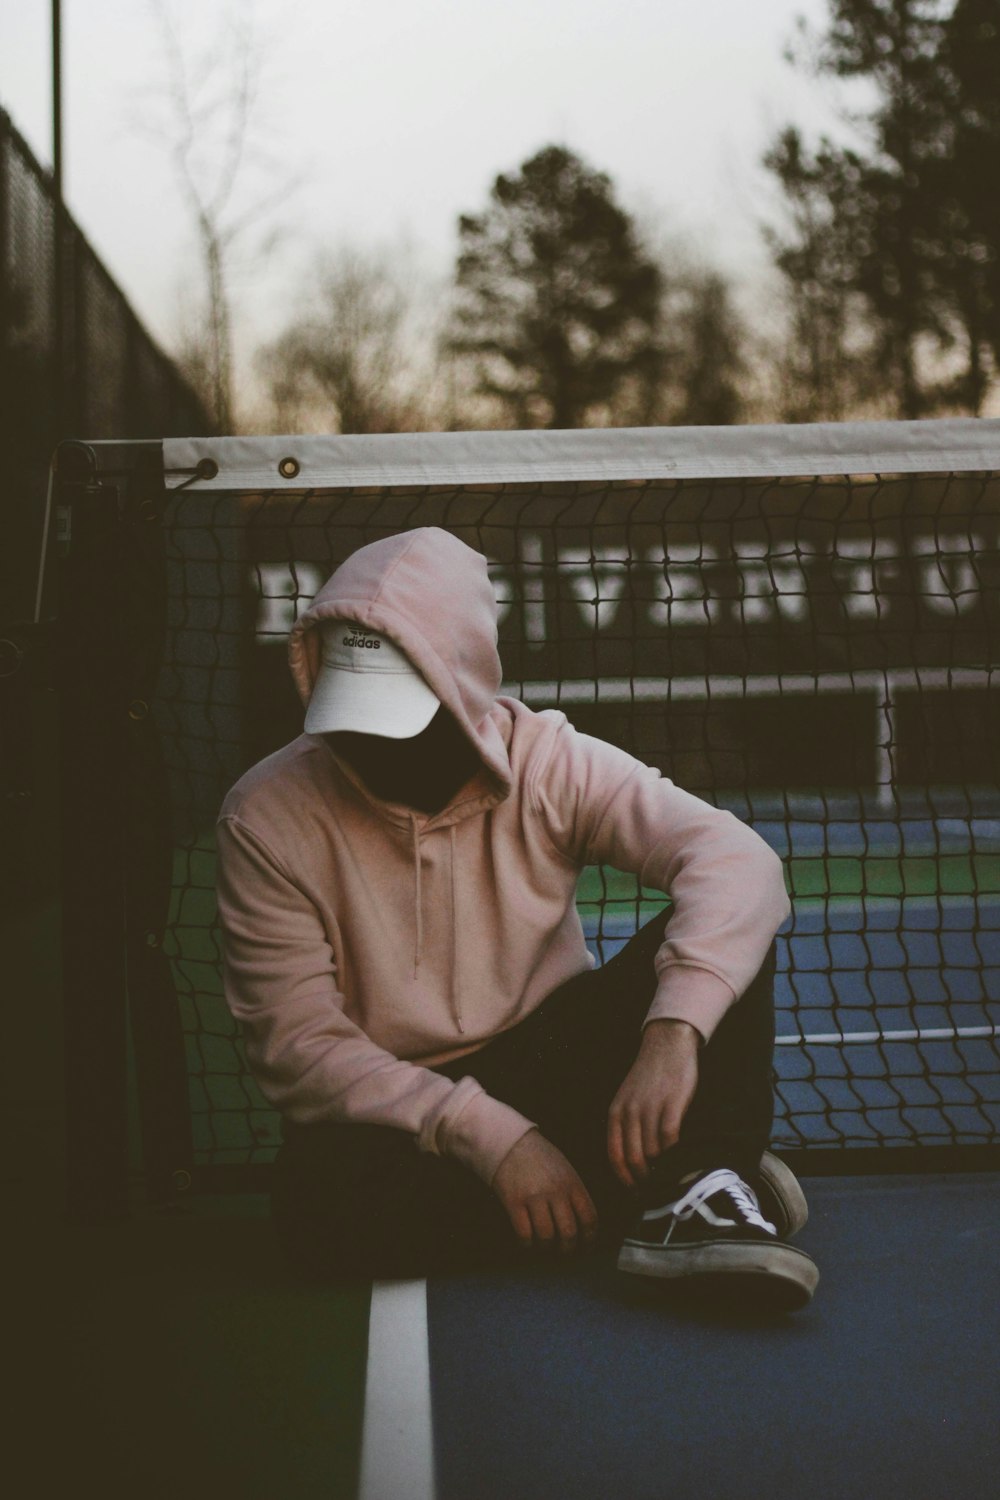 27 Hoodie Pictures Download Free Images Stock Photos On Unsplash